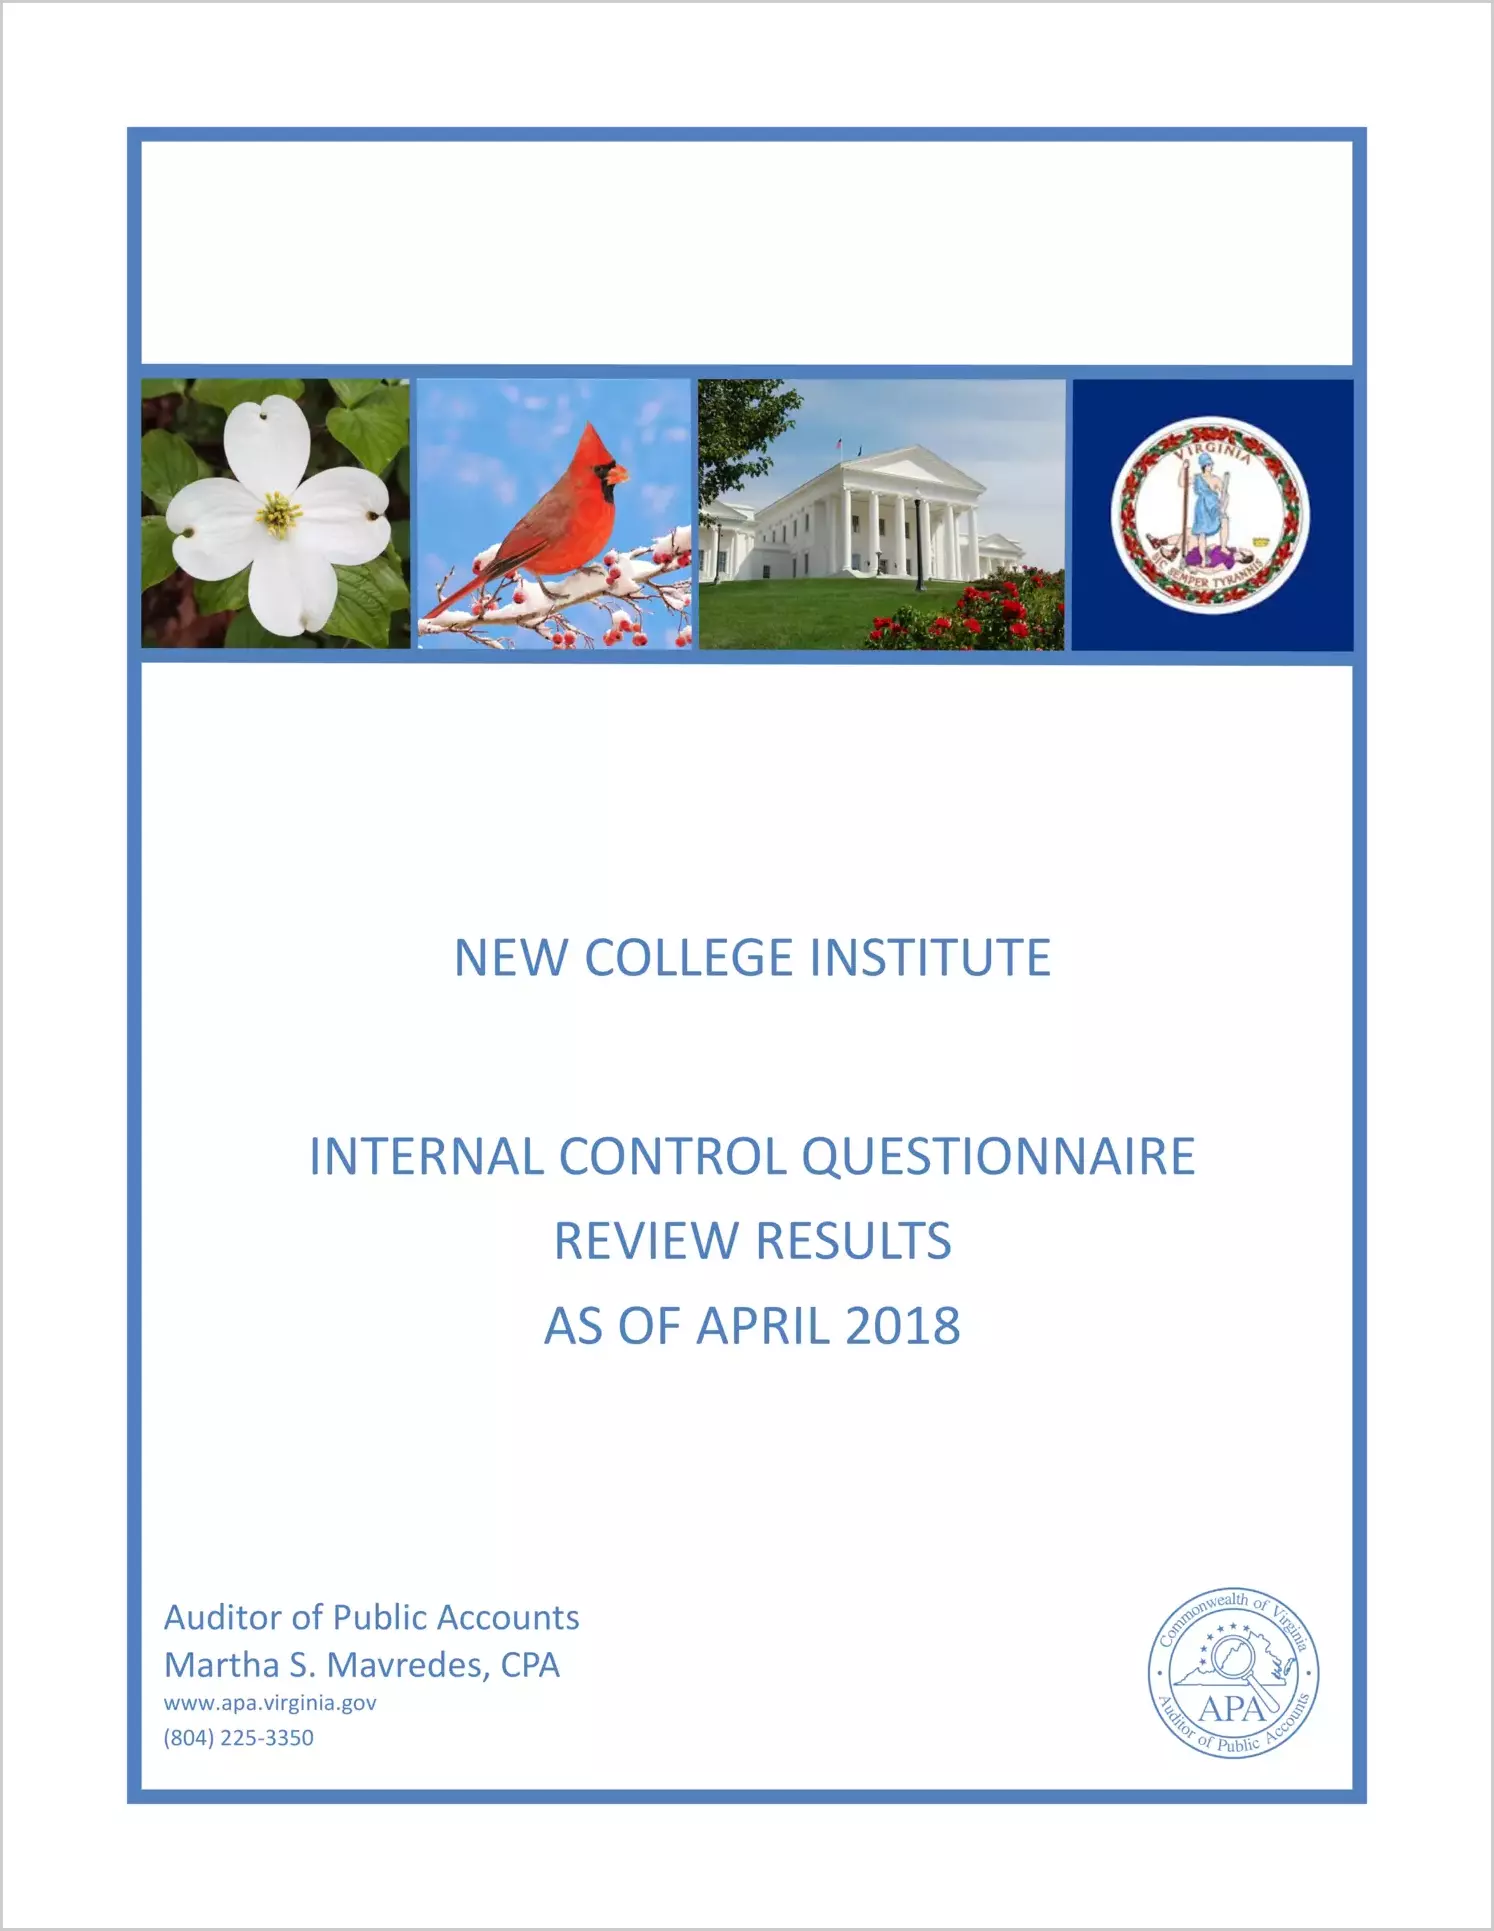 New College Institute Internal Control Questionnaire Review Results as of April 2018